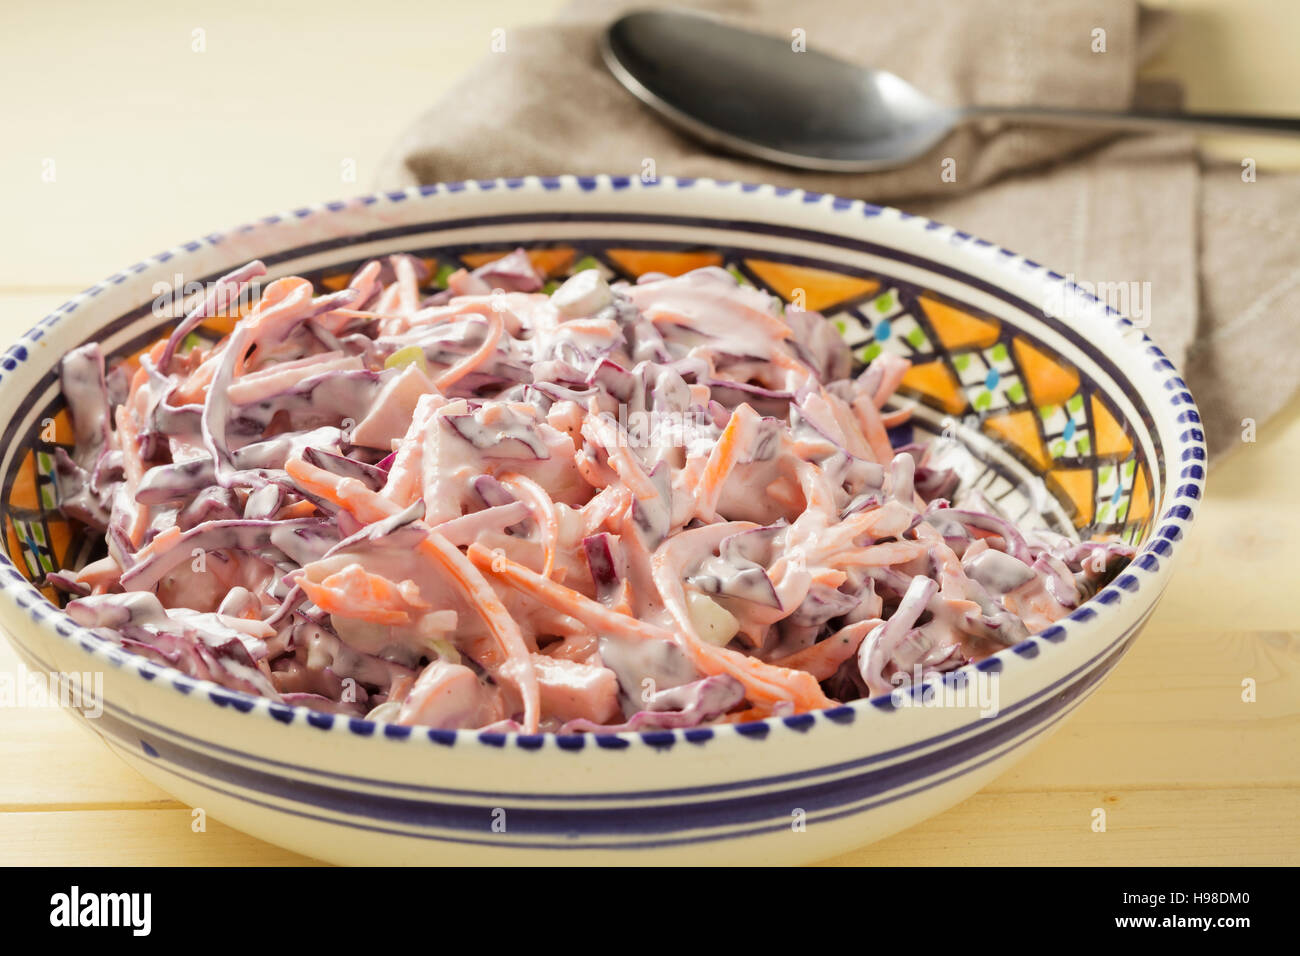 red cabbage coleslaw Stock Photo